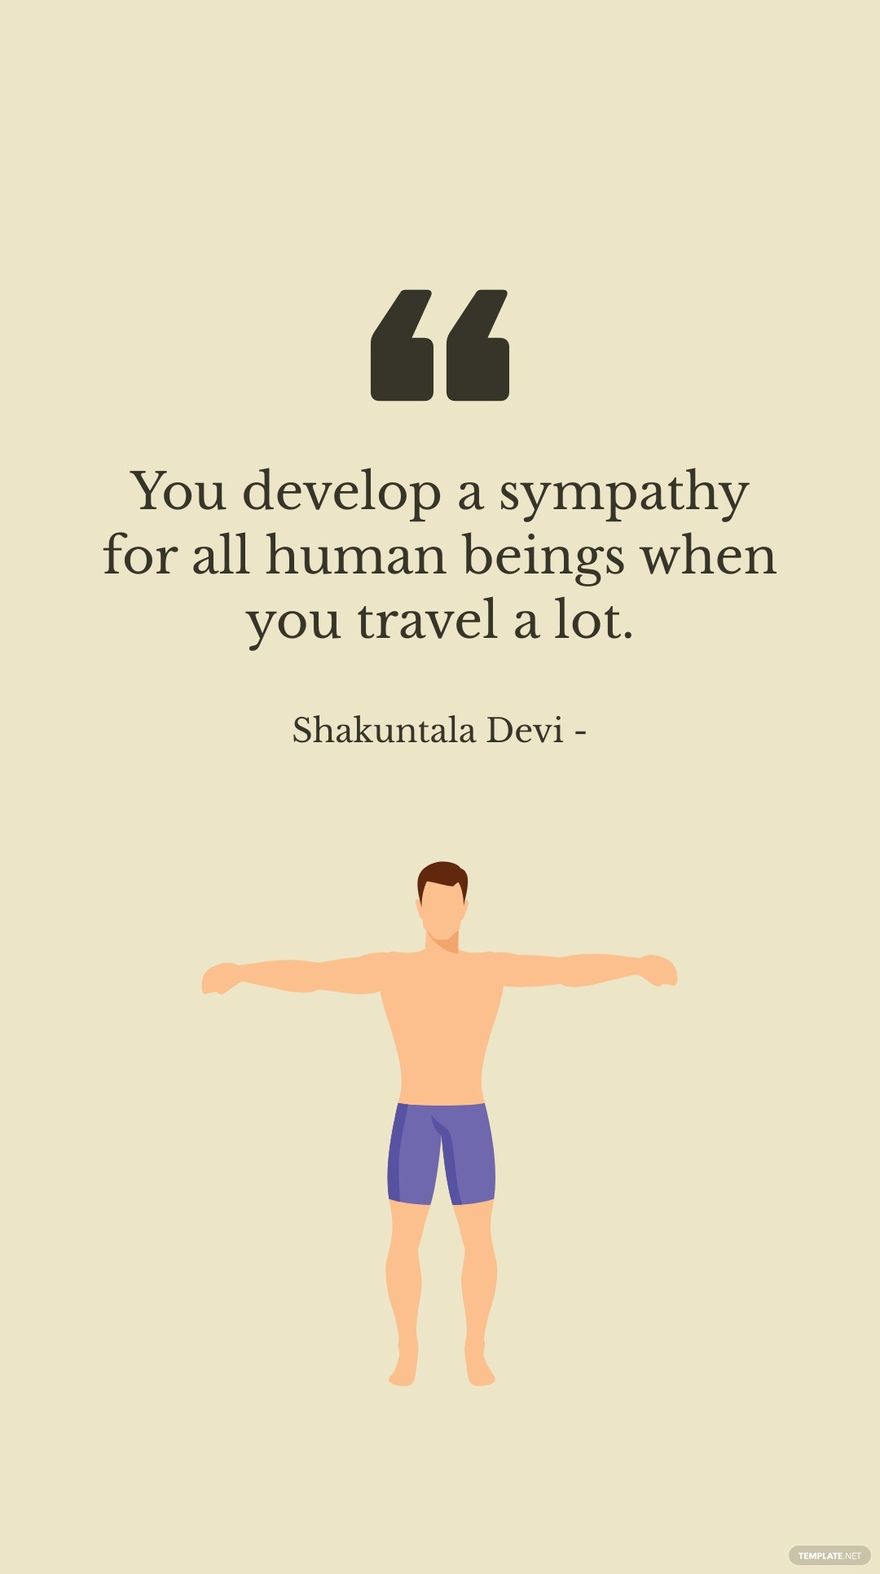 Shakuntala Devi - You develop a sympathy for all human beings when you travel a lot. in JPG